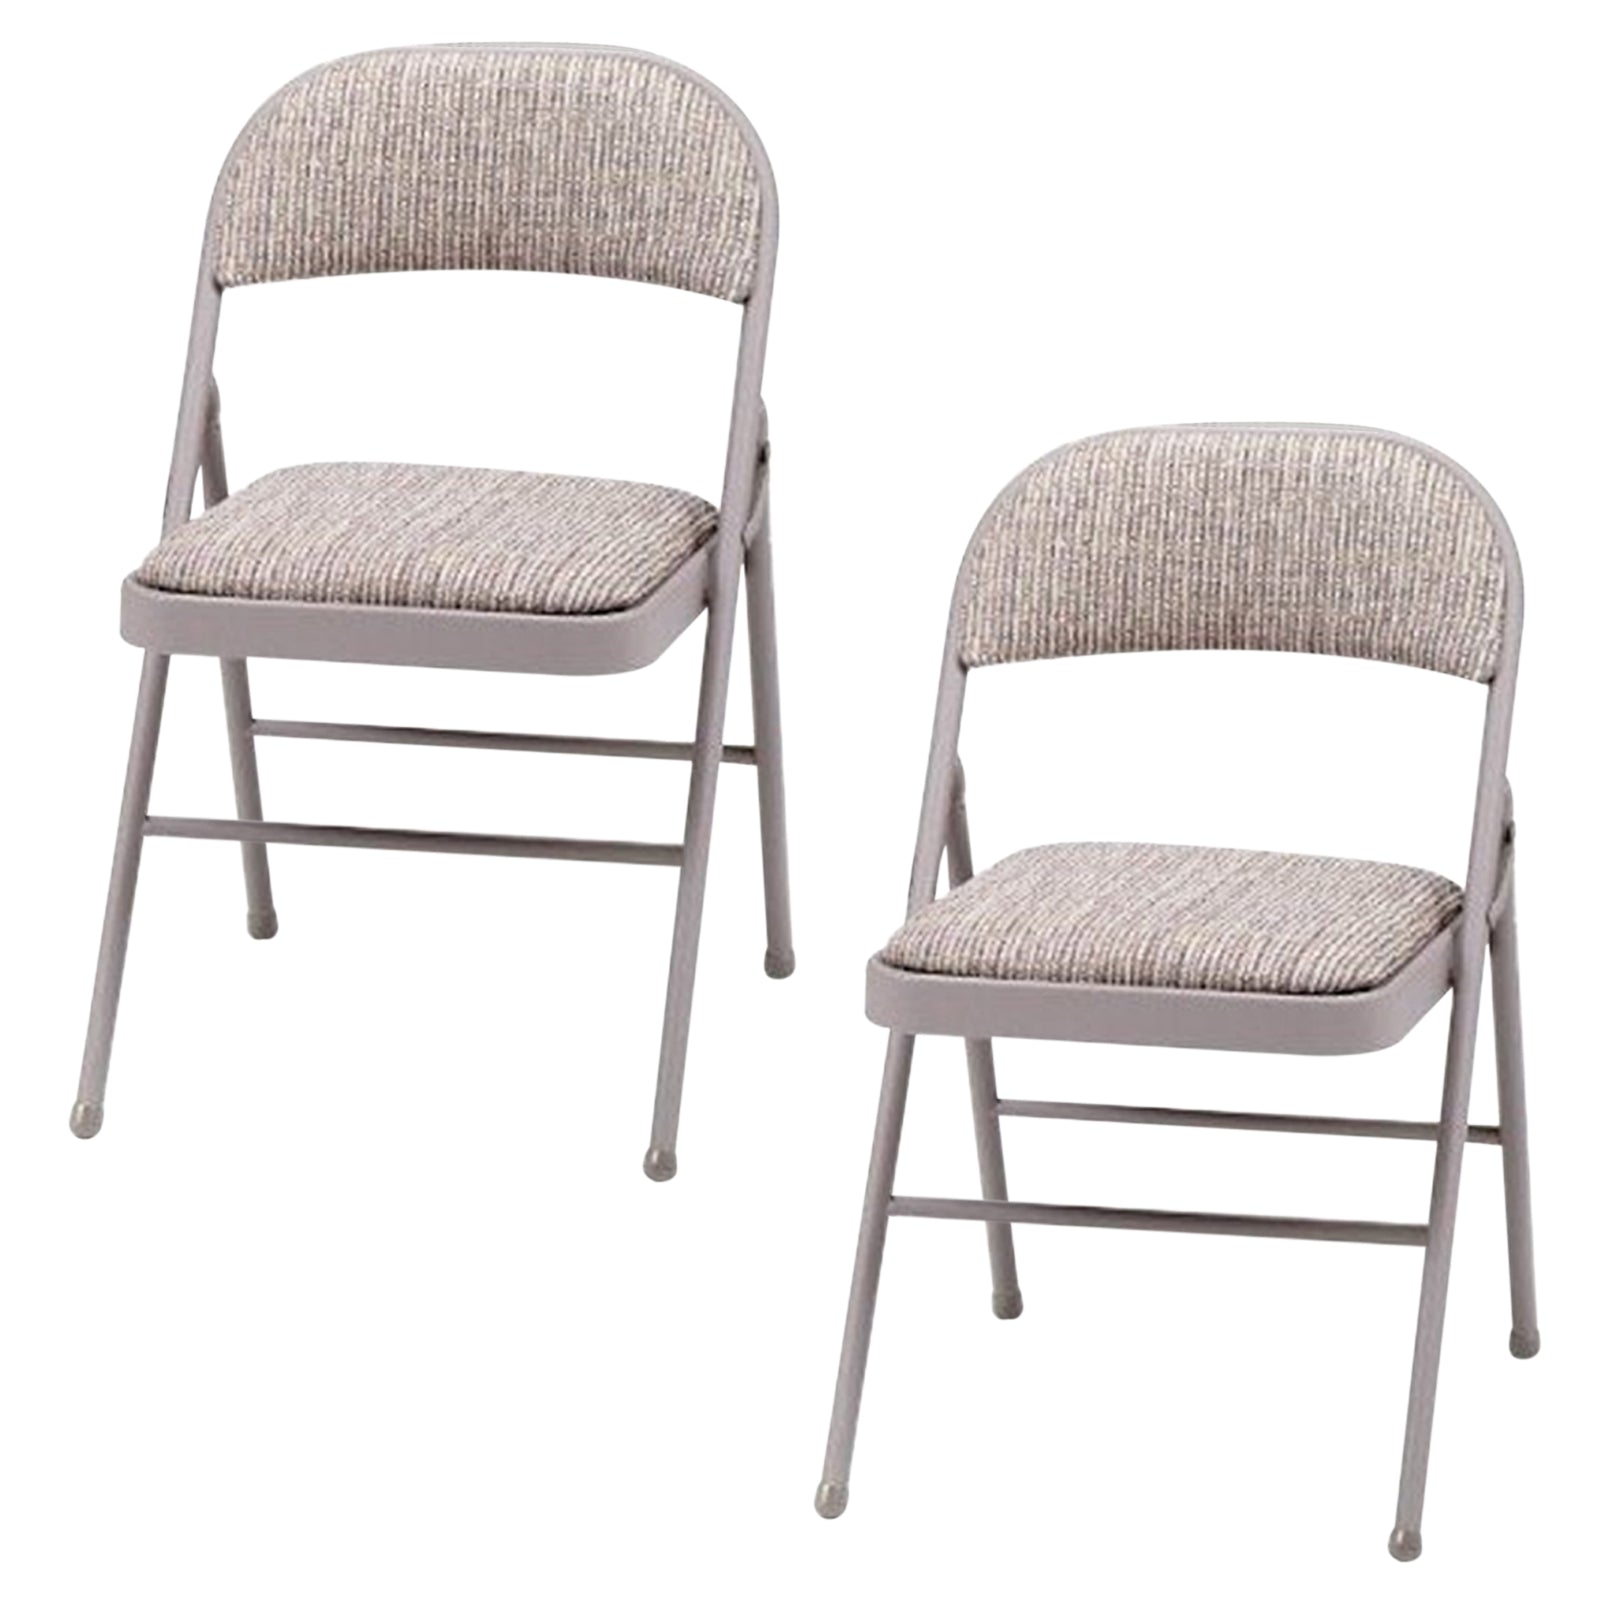 Deluxe Comfort Folding Chairs - 0